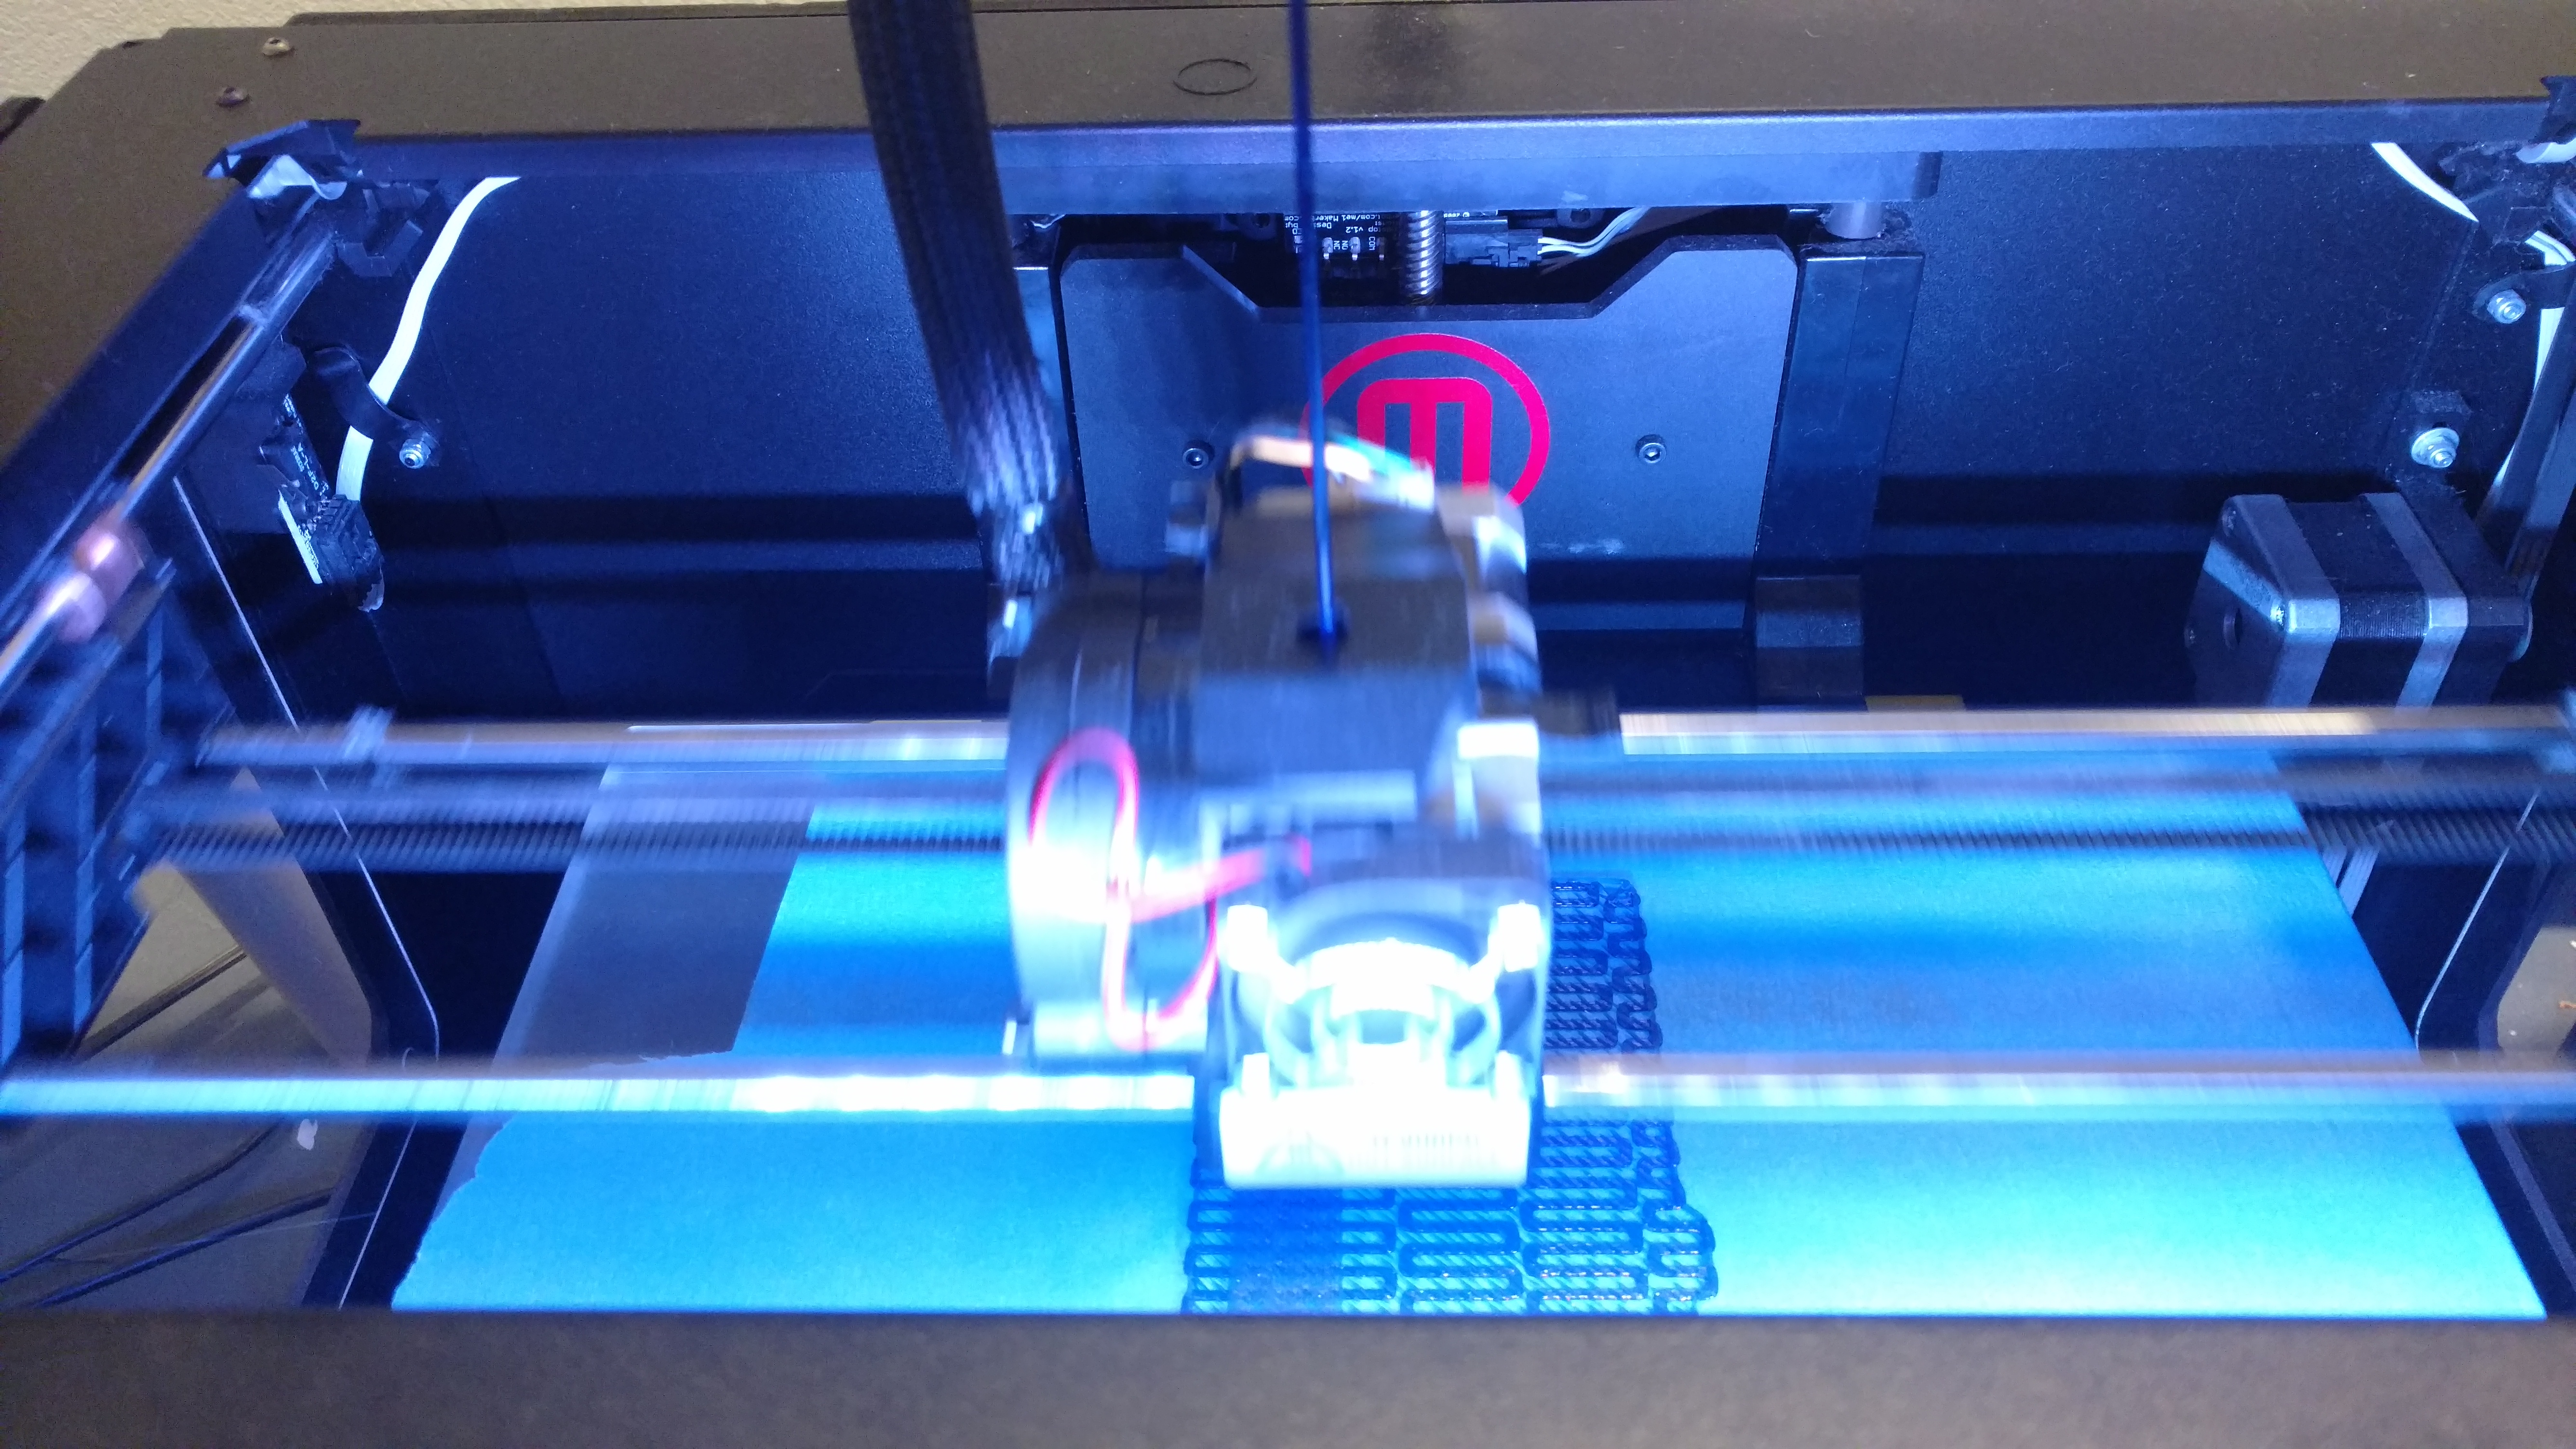 One of the 3D printers in action, lit up in blue